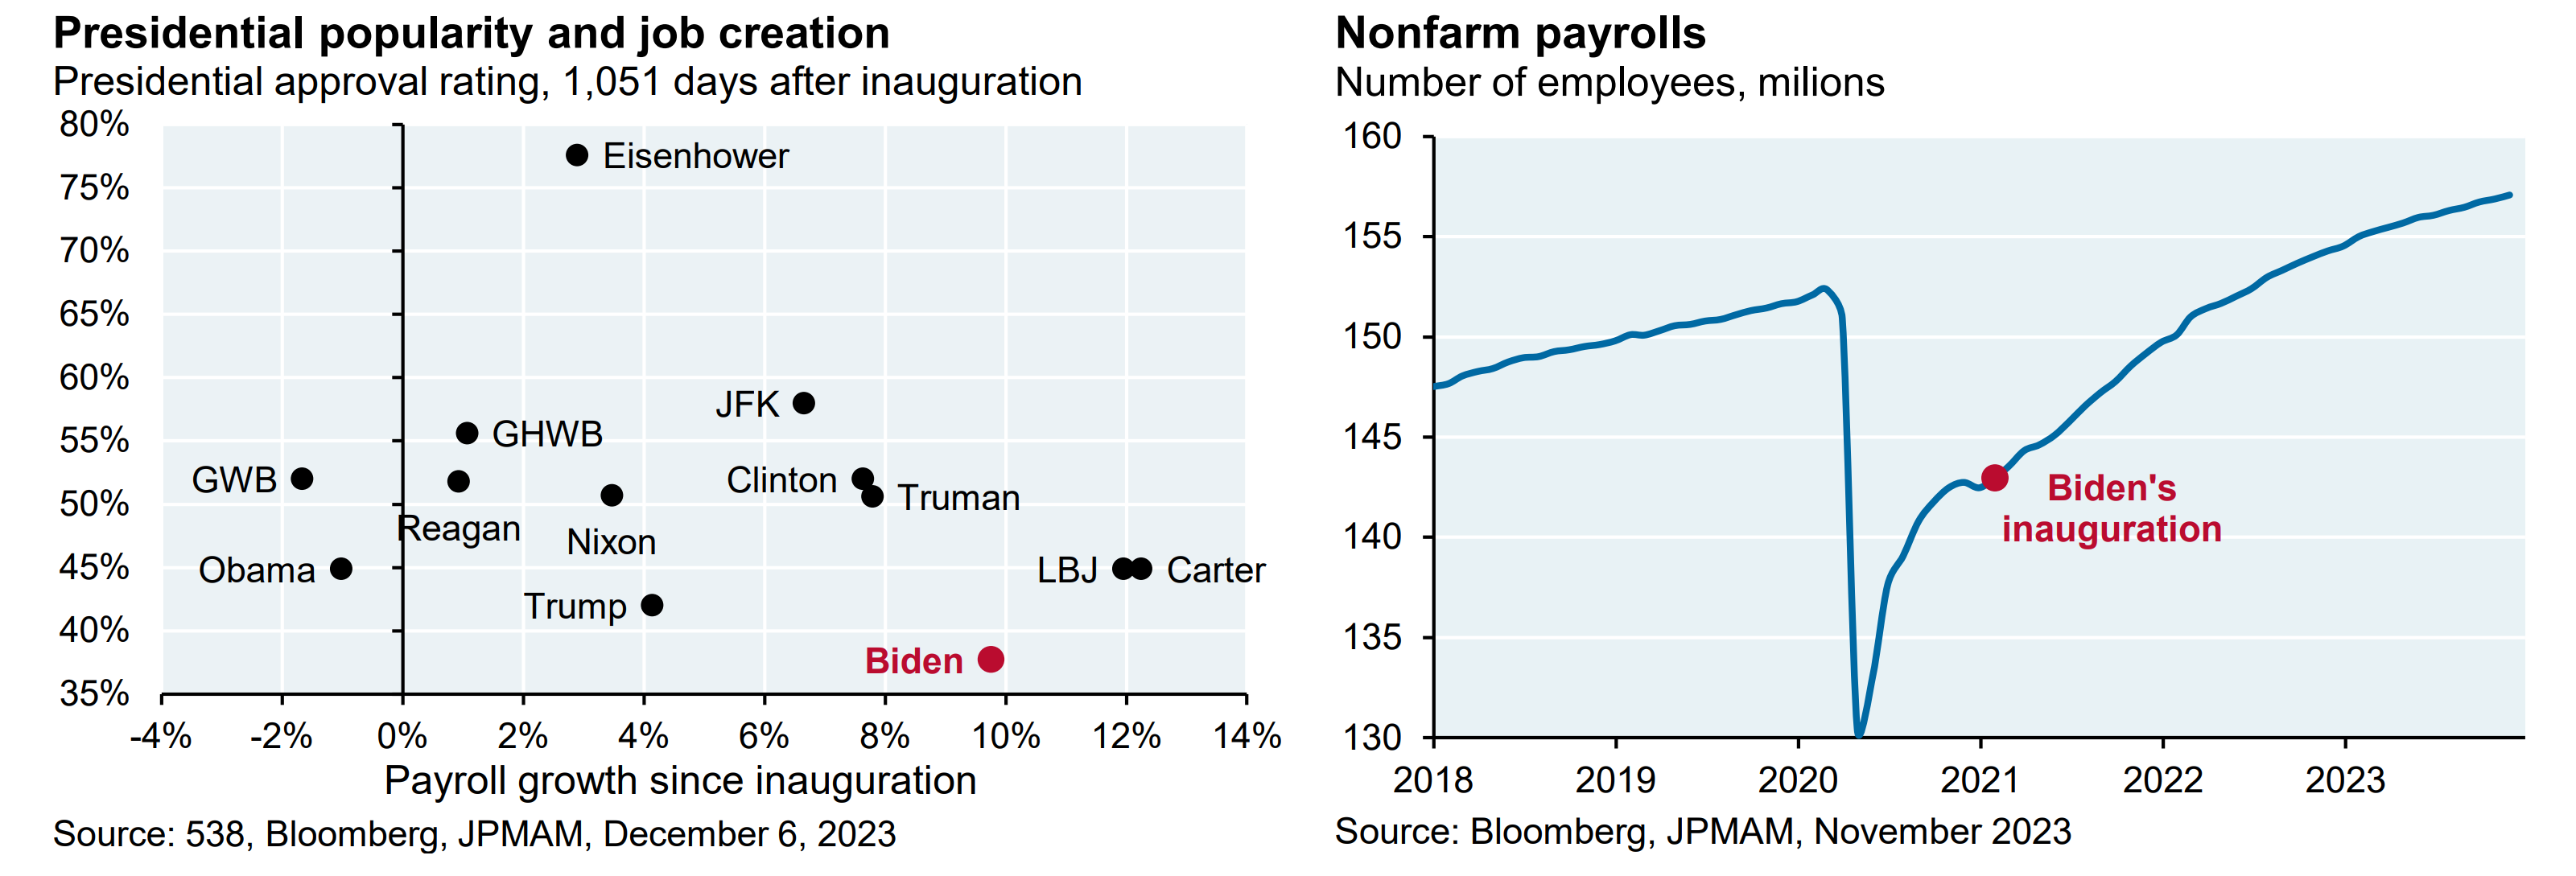 Michael Cembalest of JPMorgan predicts that Joe Biden may bow out of the 2024 presidential race in favor of a more viable candidate as soon as Super Tuesday.